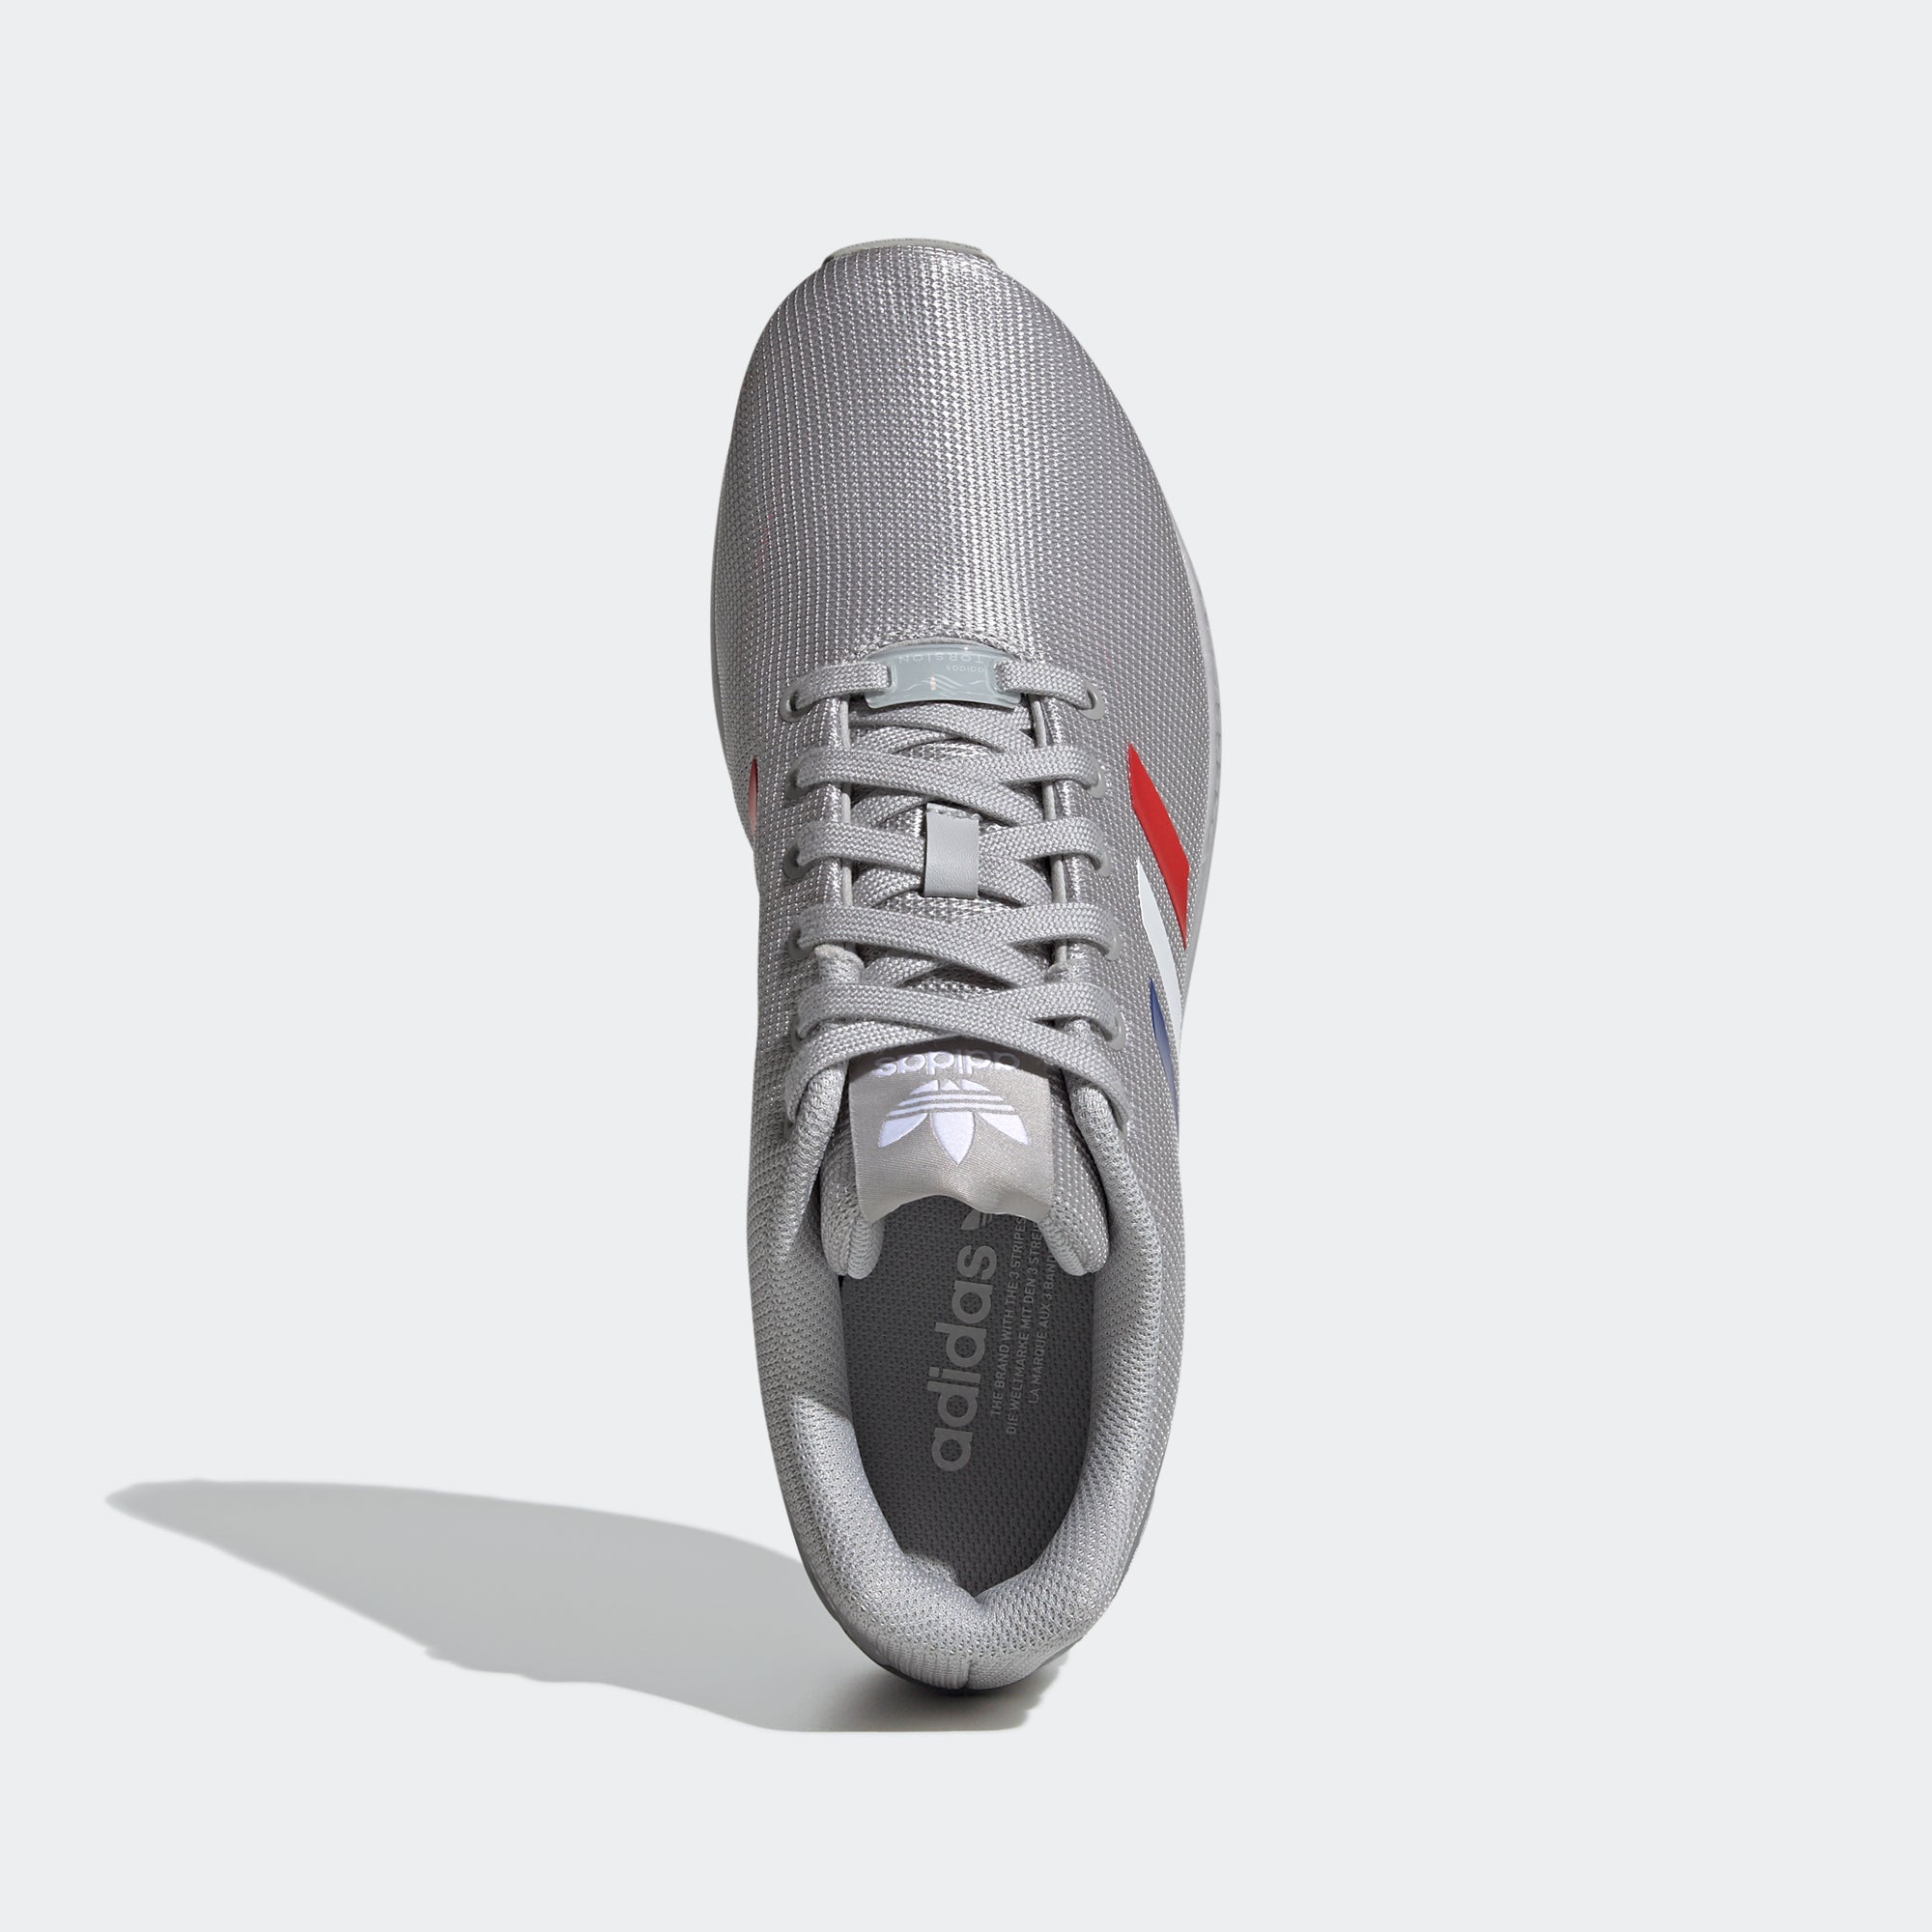 adidas ZX Flux Shoes Grey Chicago City Sports